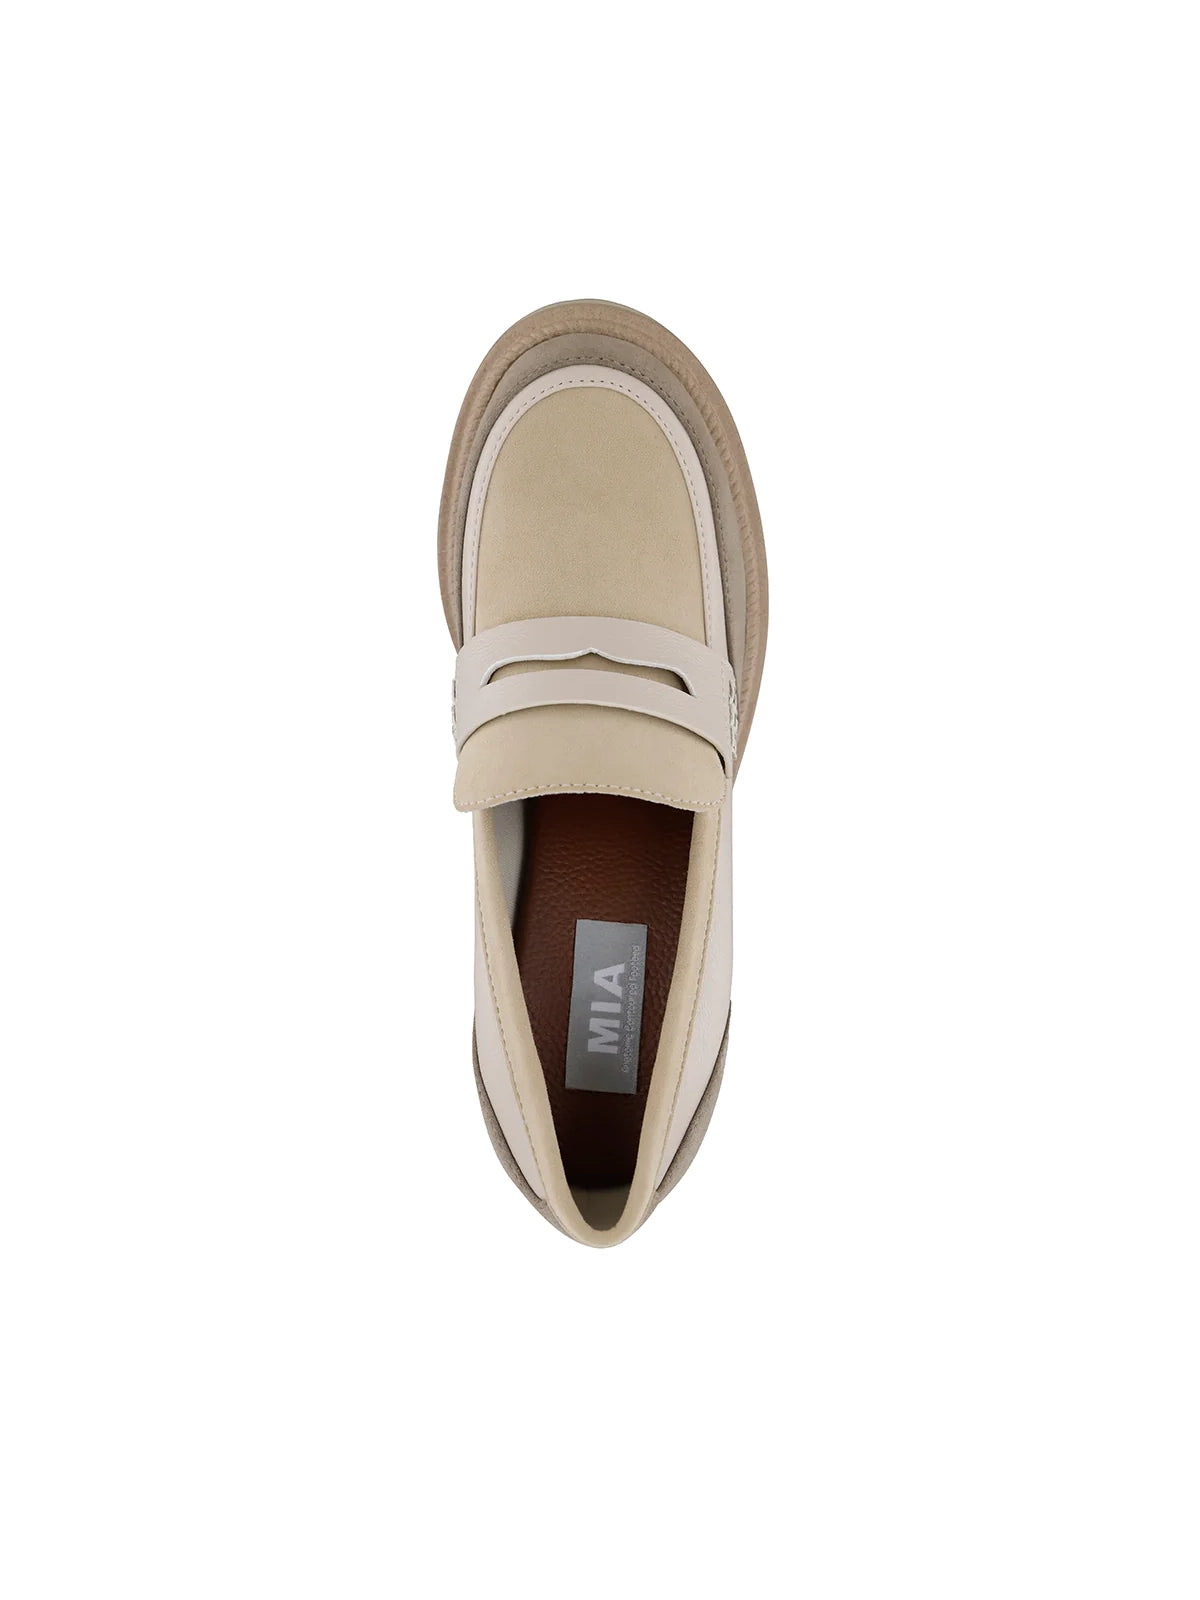 MIA nissa platform penny loafer in sand beige taupe